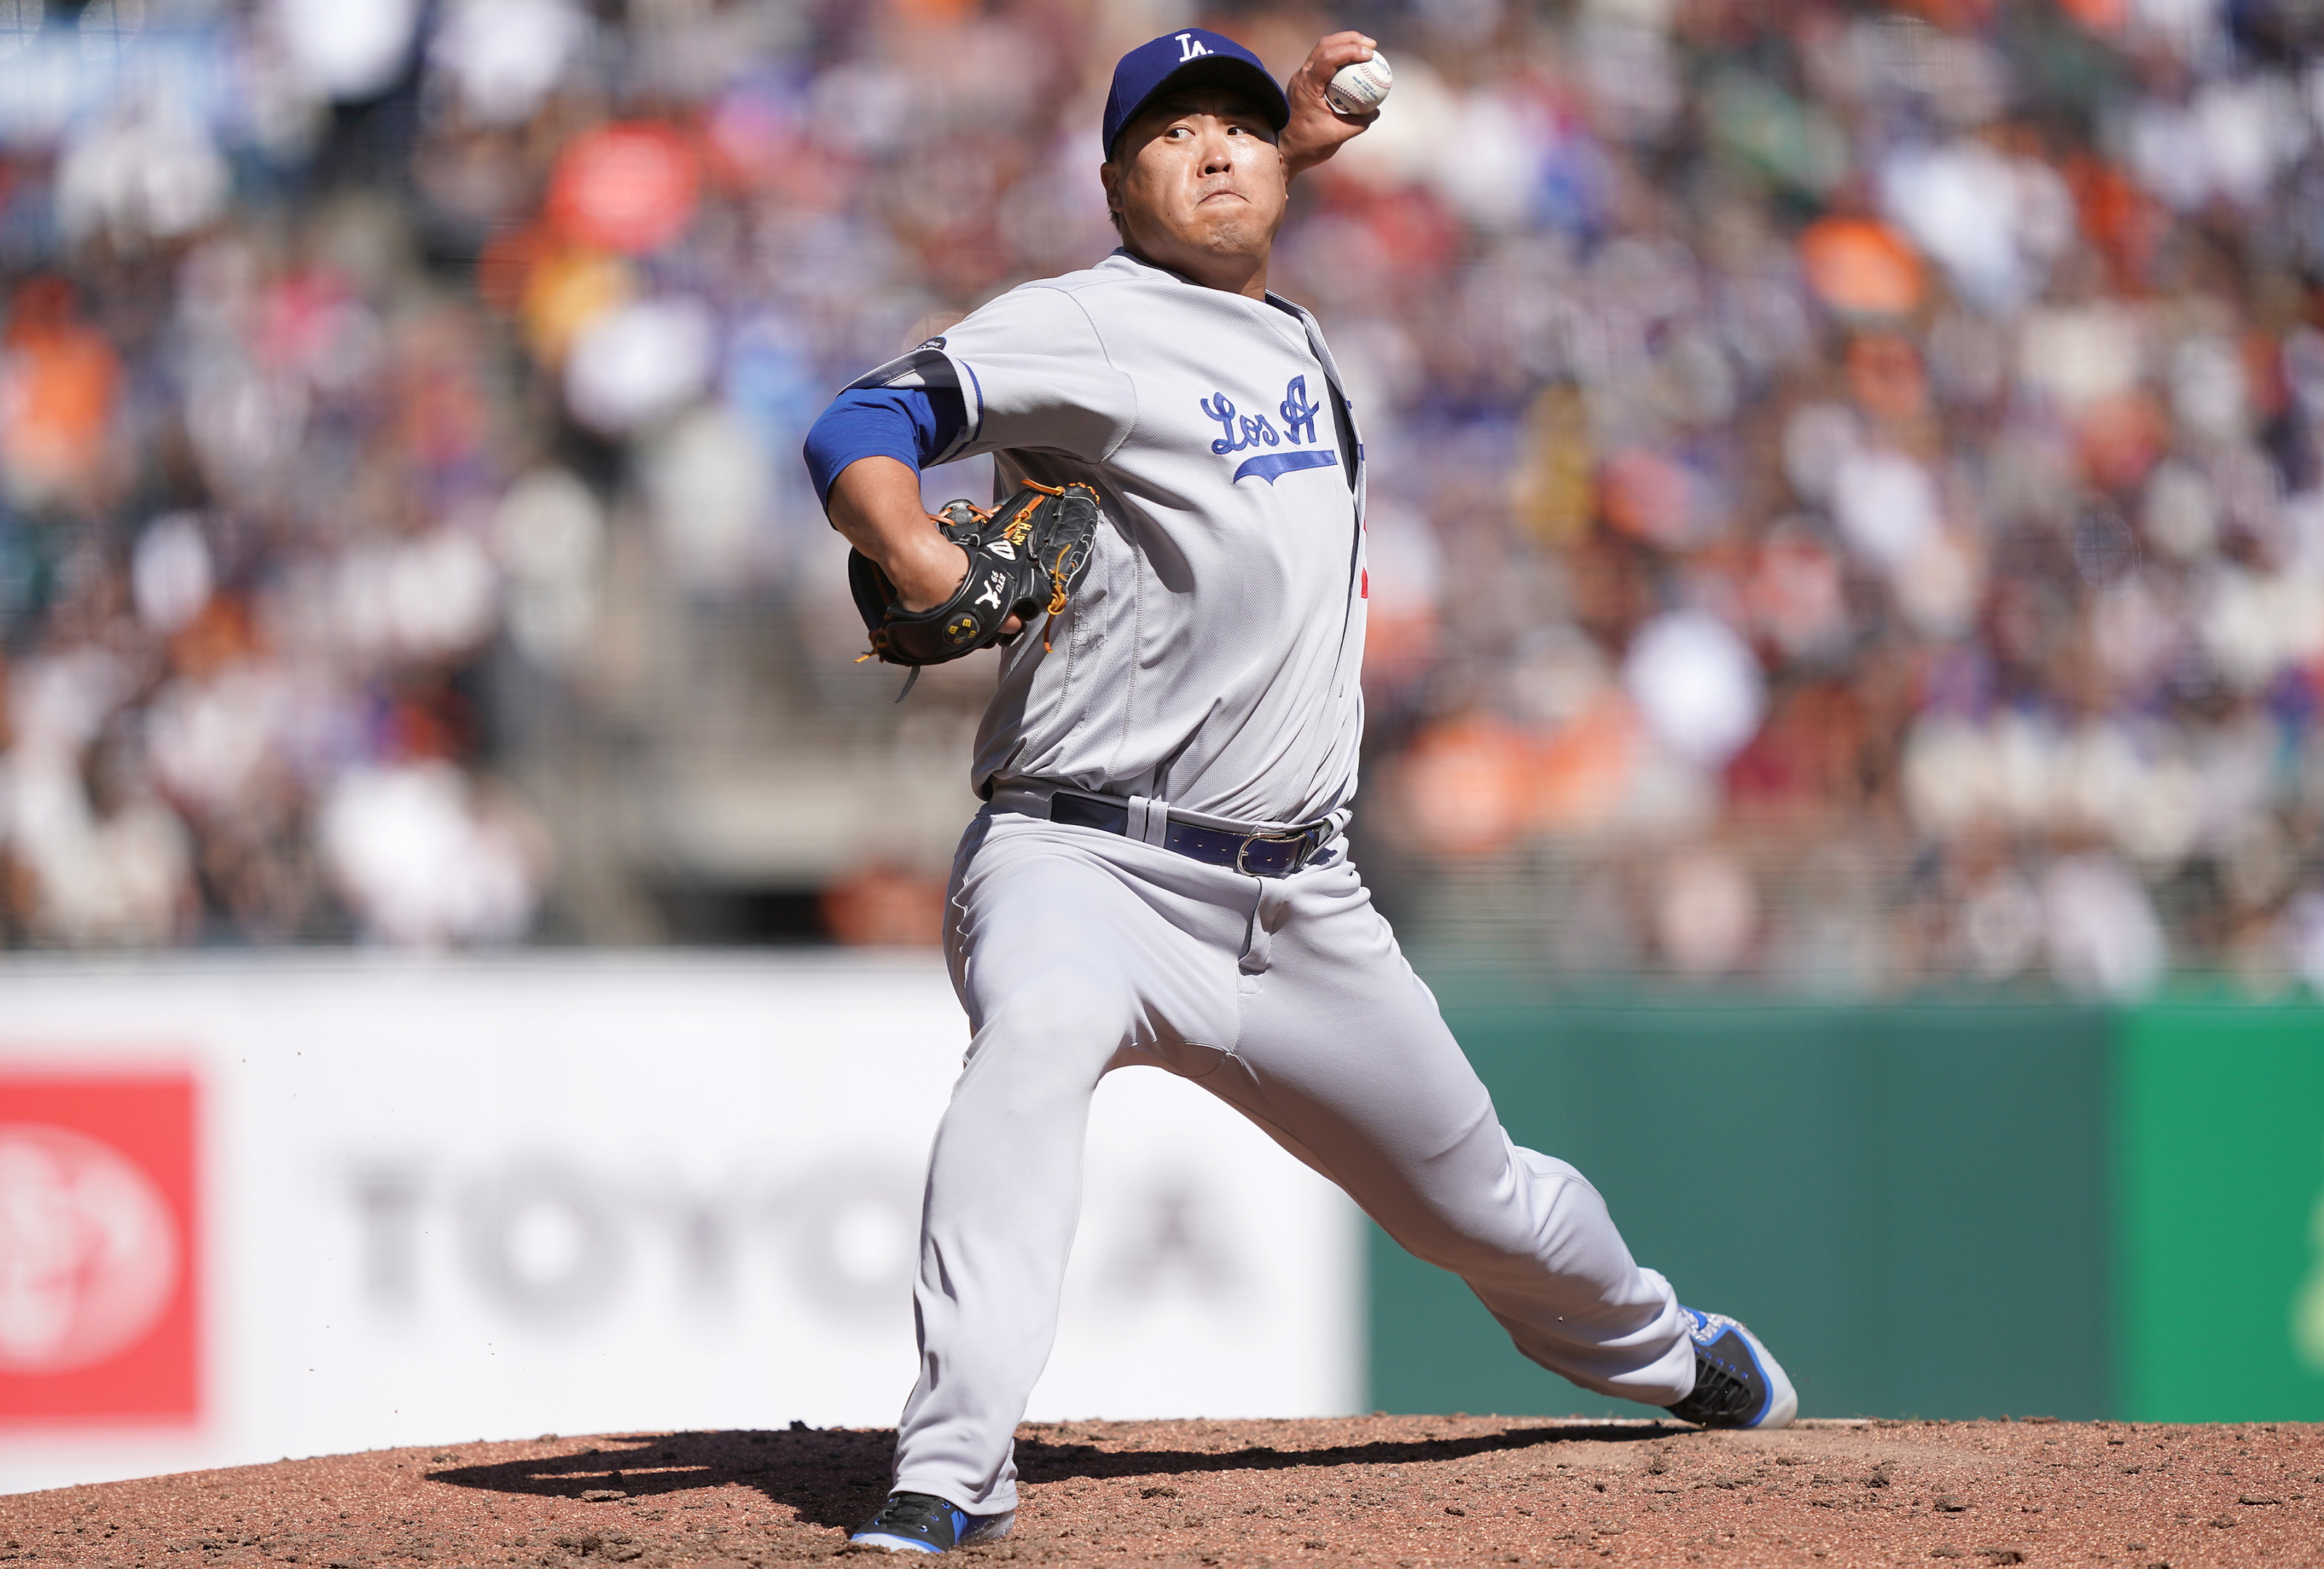 Dodgers: Ryu Could Be the Best Fifth Starter in Baseball